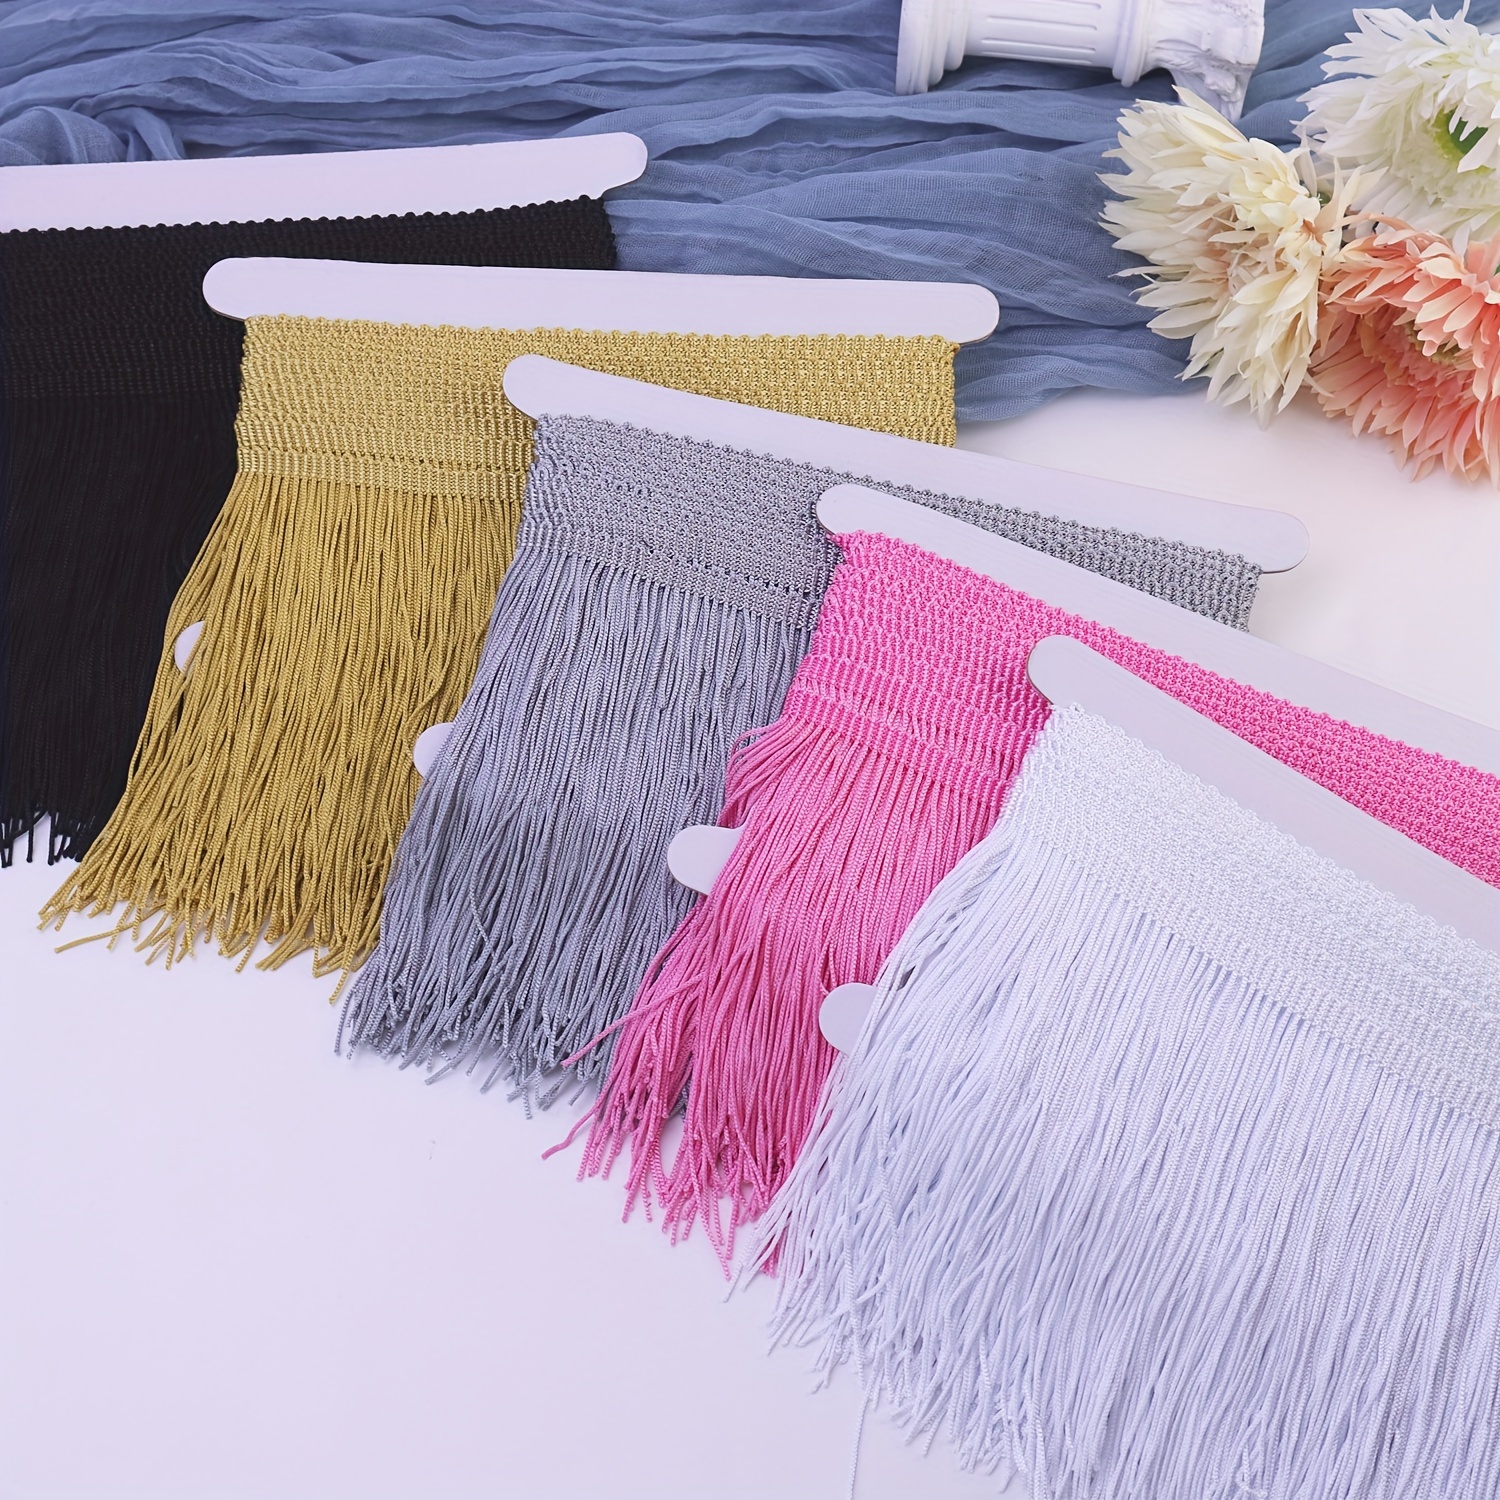 2 Yards Fringe Lace Trim Polyester Tassel Fringe Trimming 4 Inch Wide  Multi-Colored Lace Trim Ribbon Fringe for Clothes Accessories Latin Dress